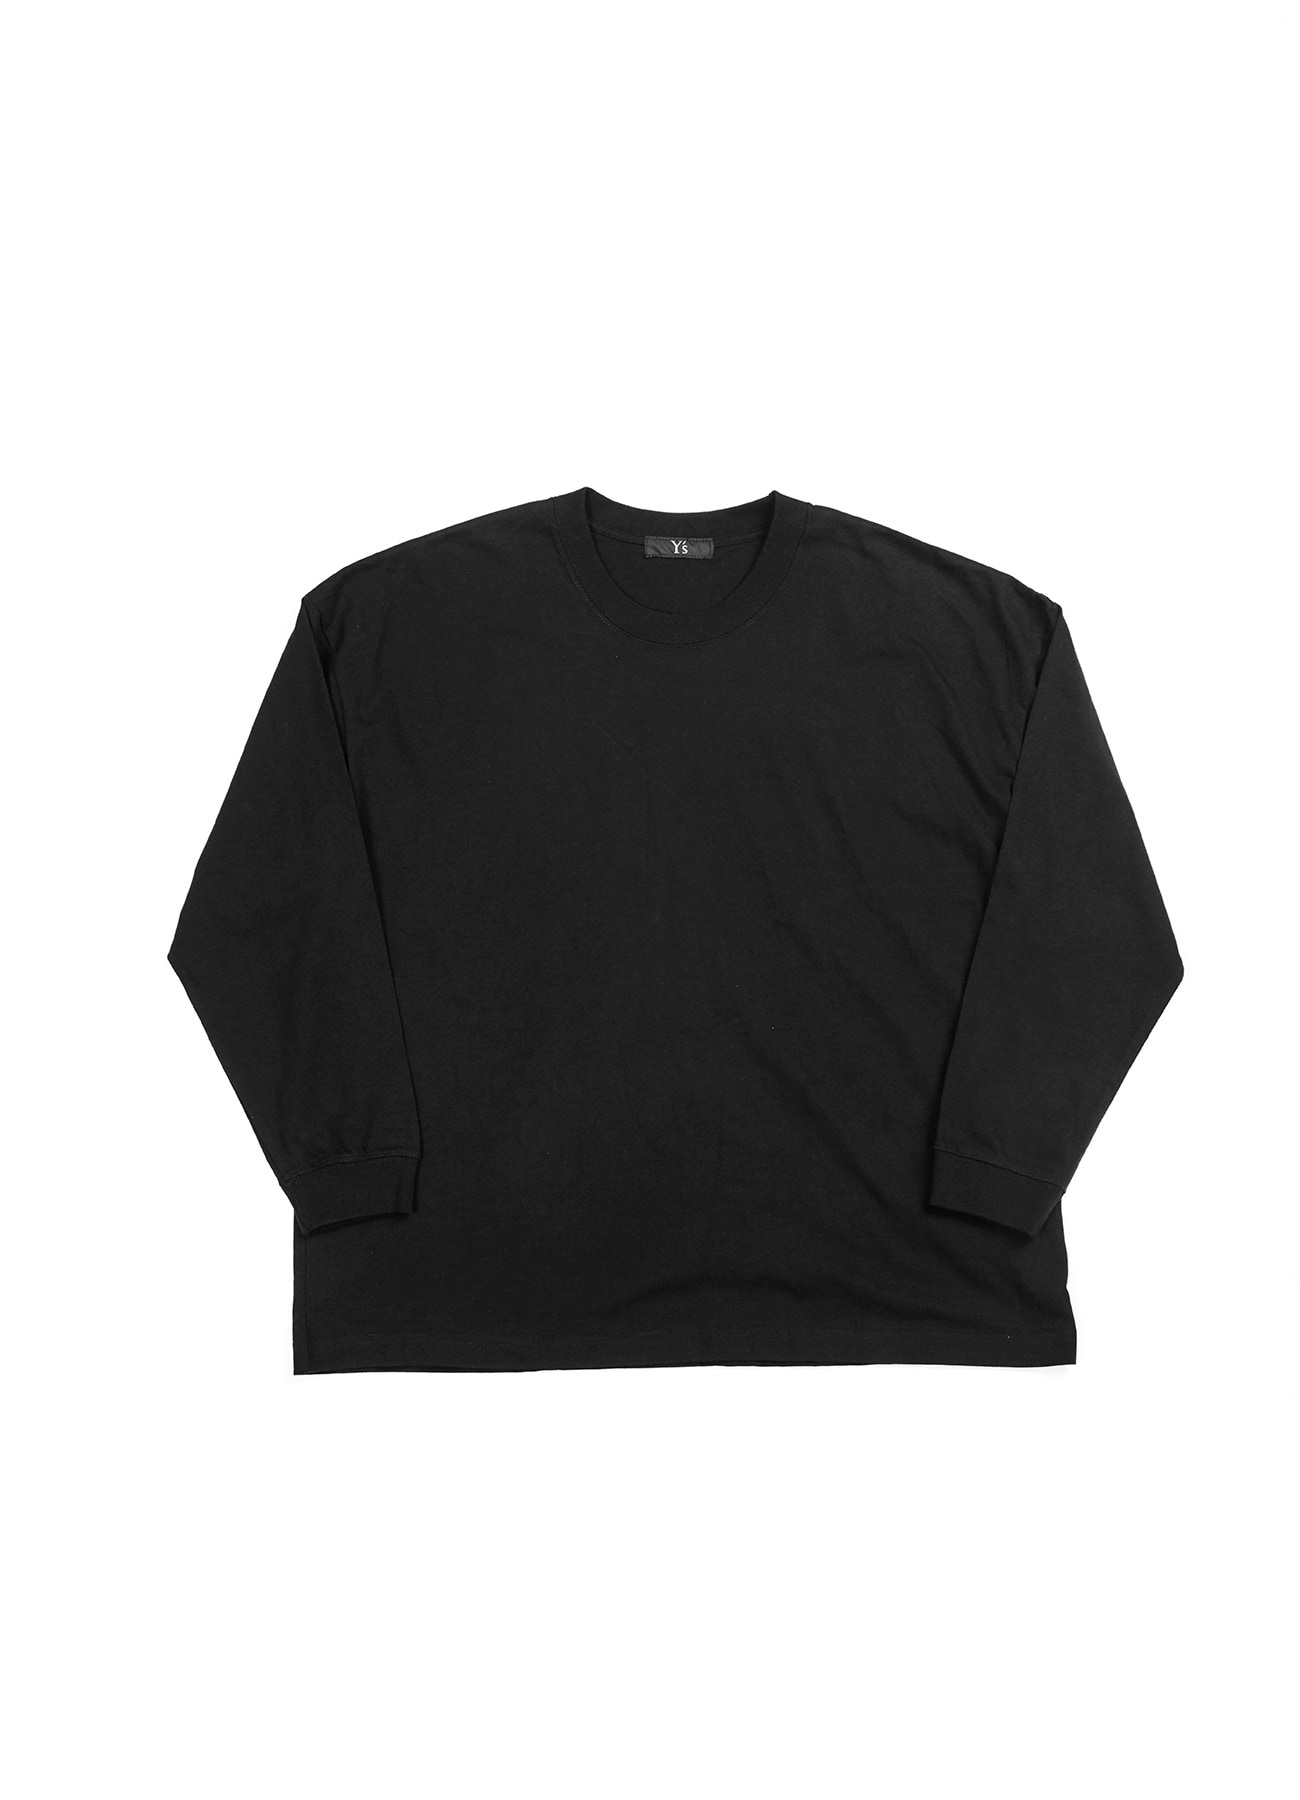 -Online EXCLUSIVE- Y's logo Long sleeve T-shirts (Wide)